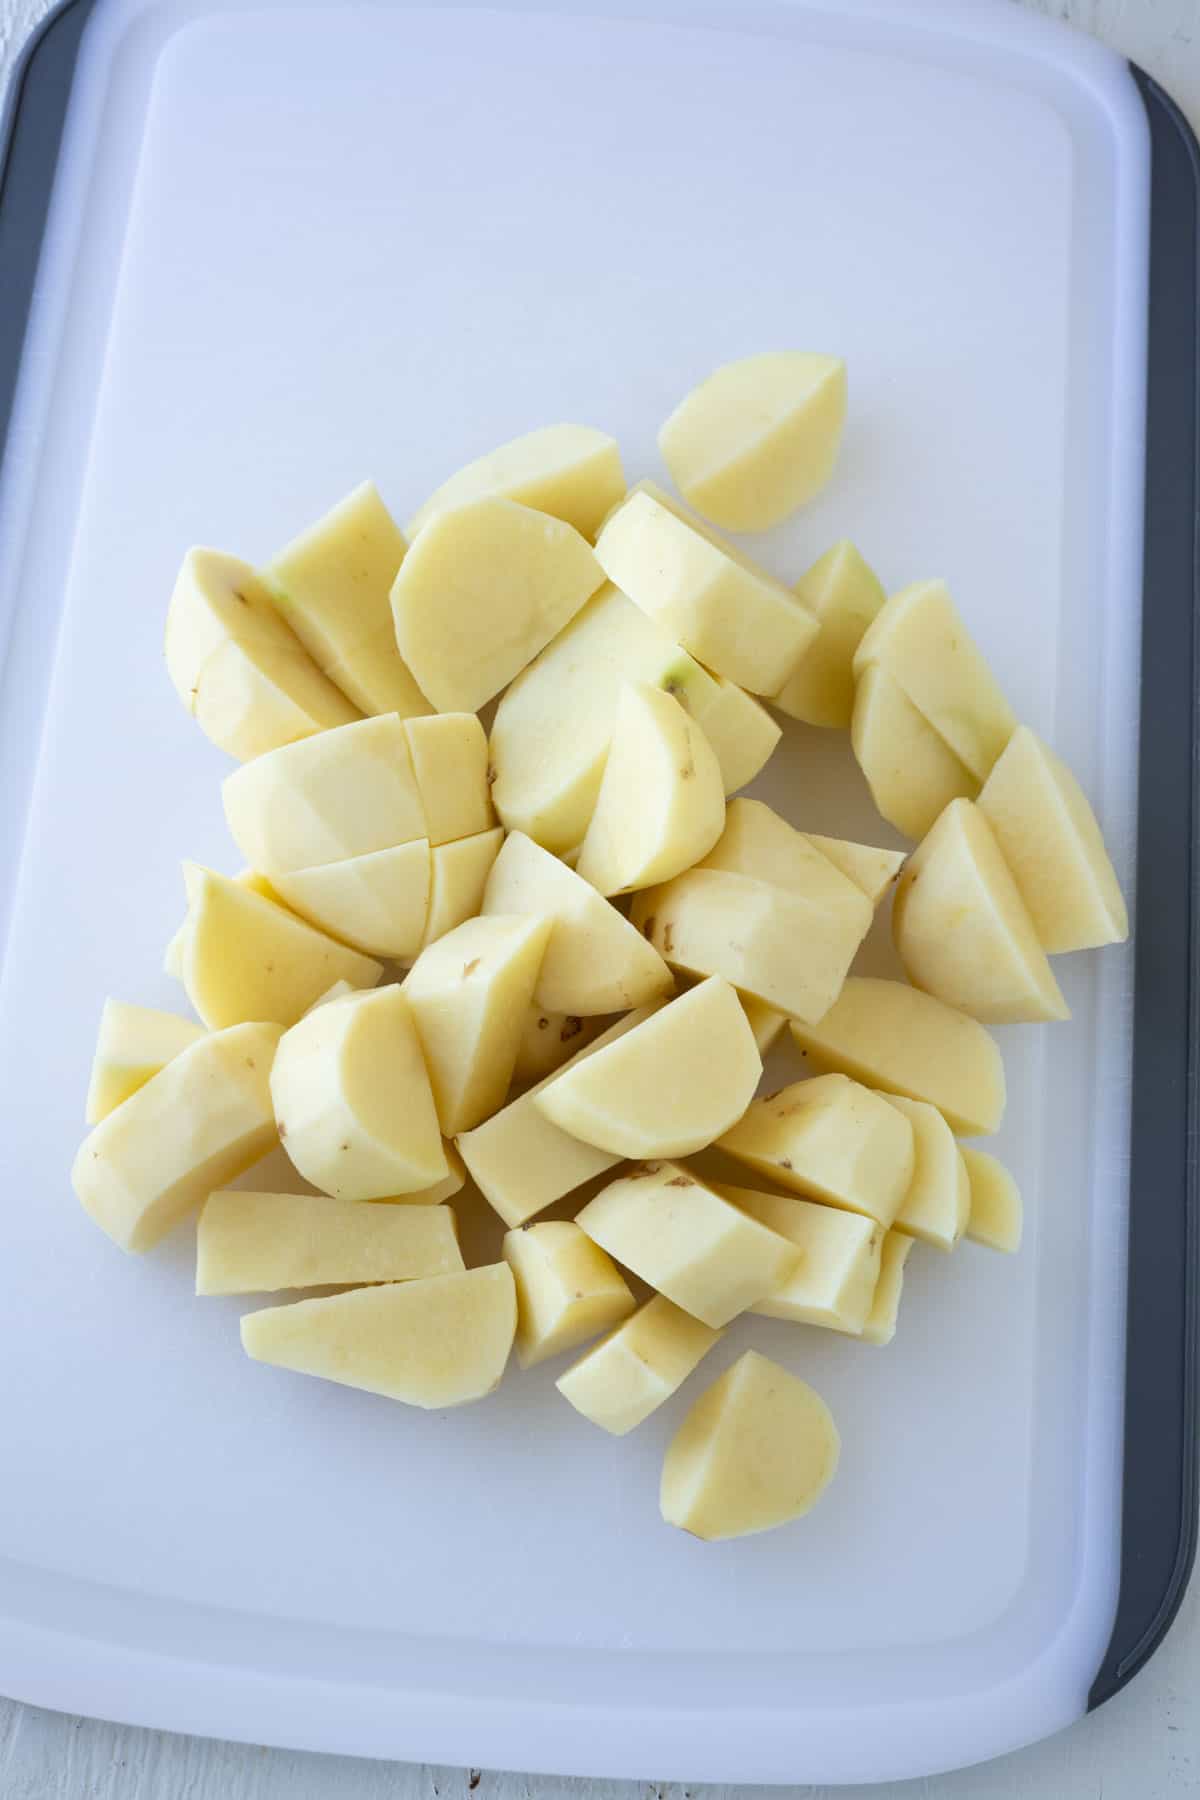 Peeled and diced potatoes on a cutting board.